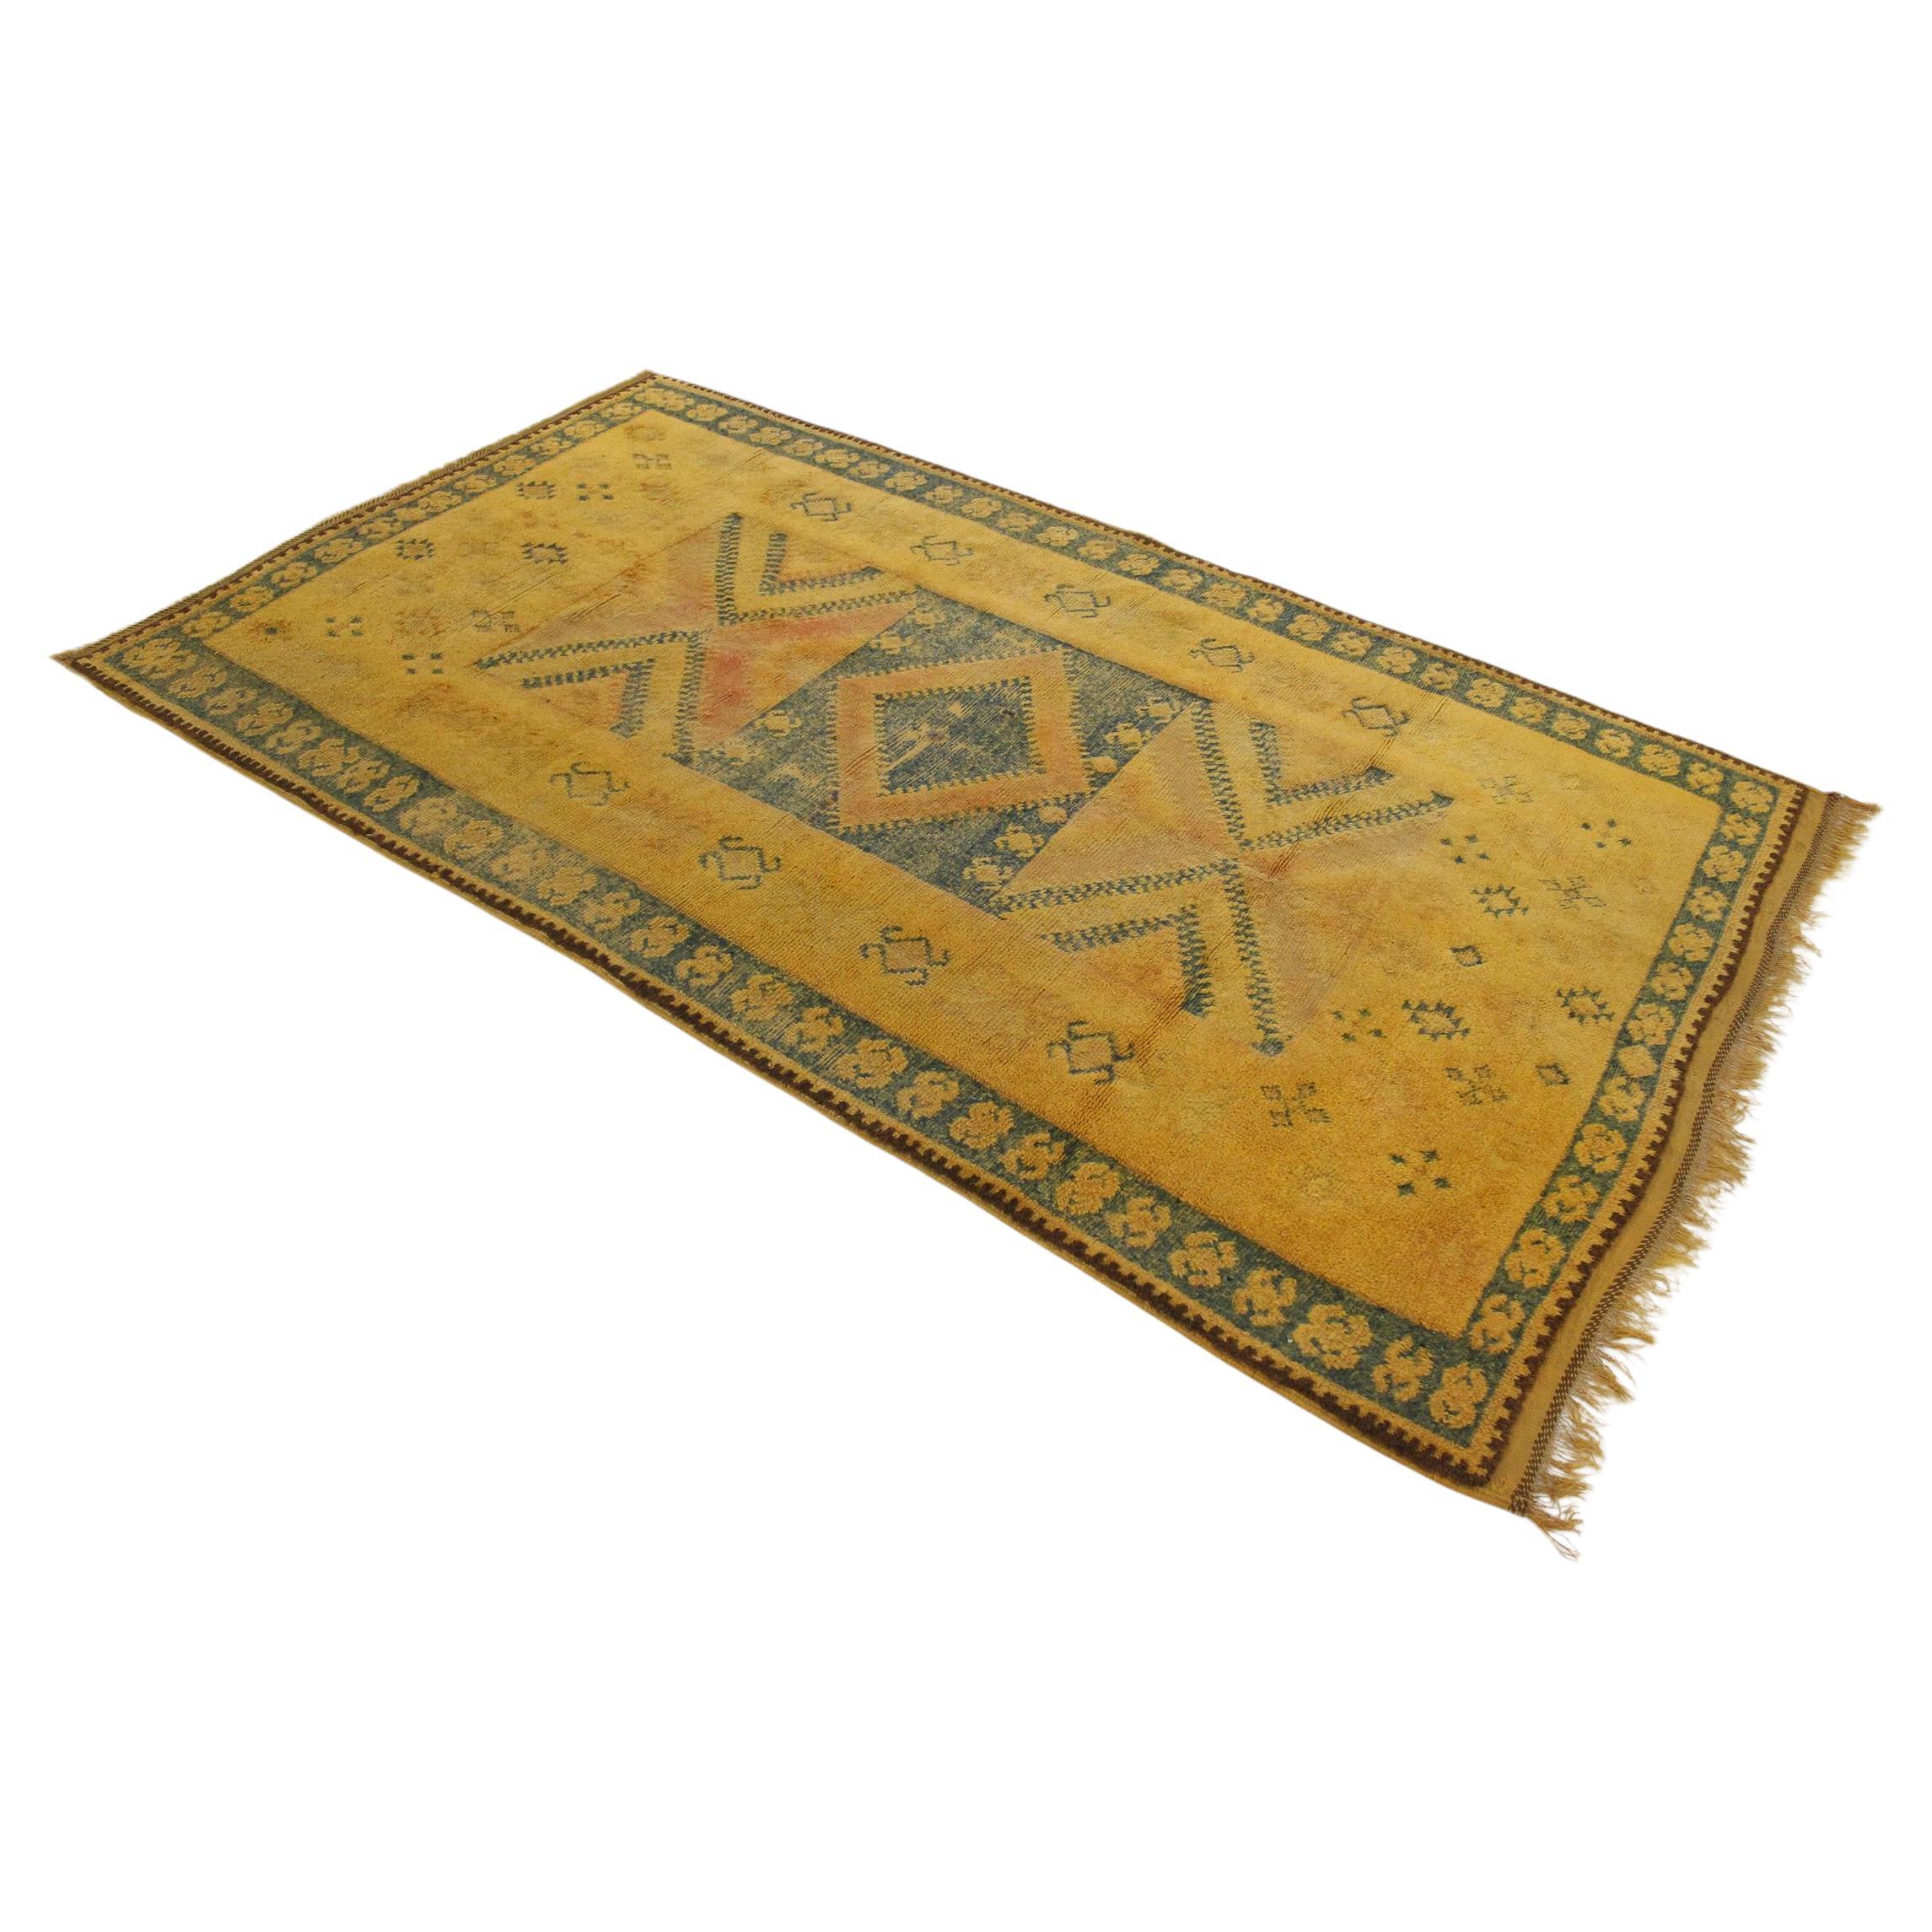 Vintage Moroccan Taznakht rug - Yellow/blue - 4.3x7.6feet / 134x234cm For Sale